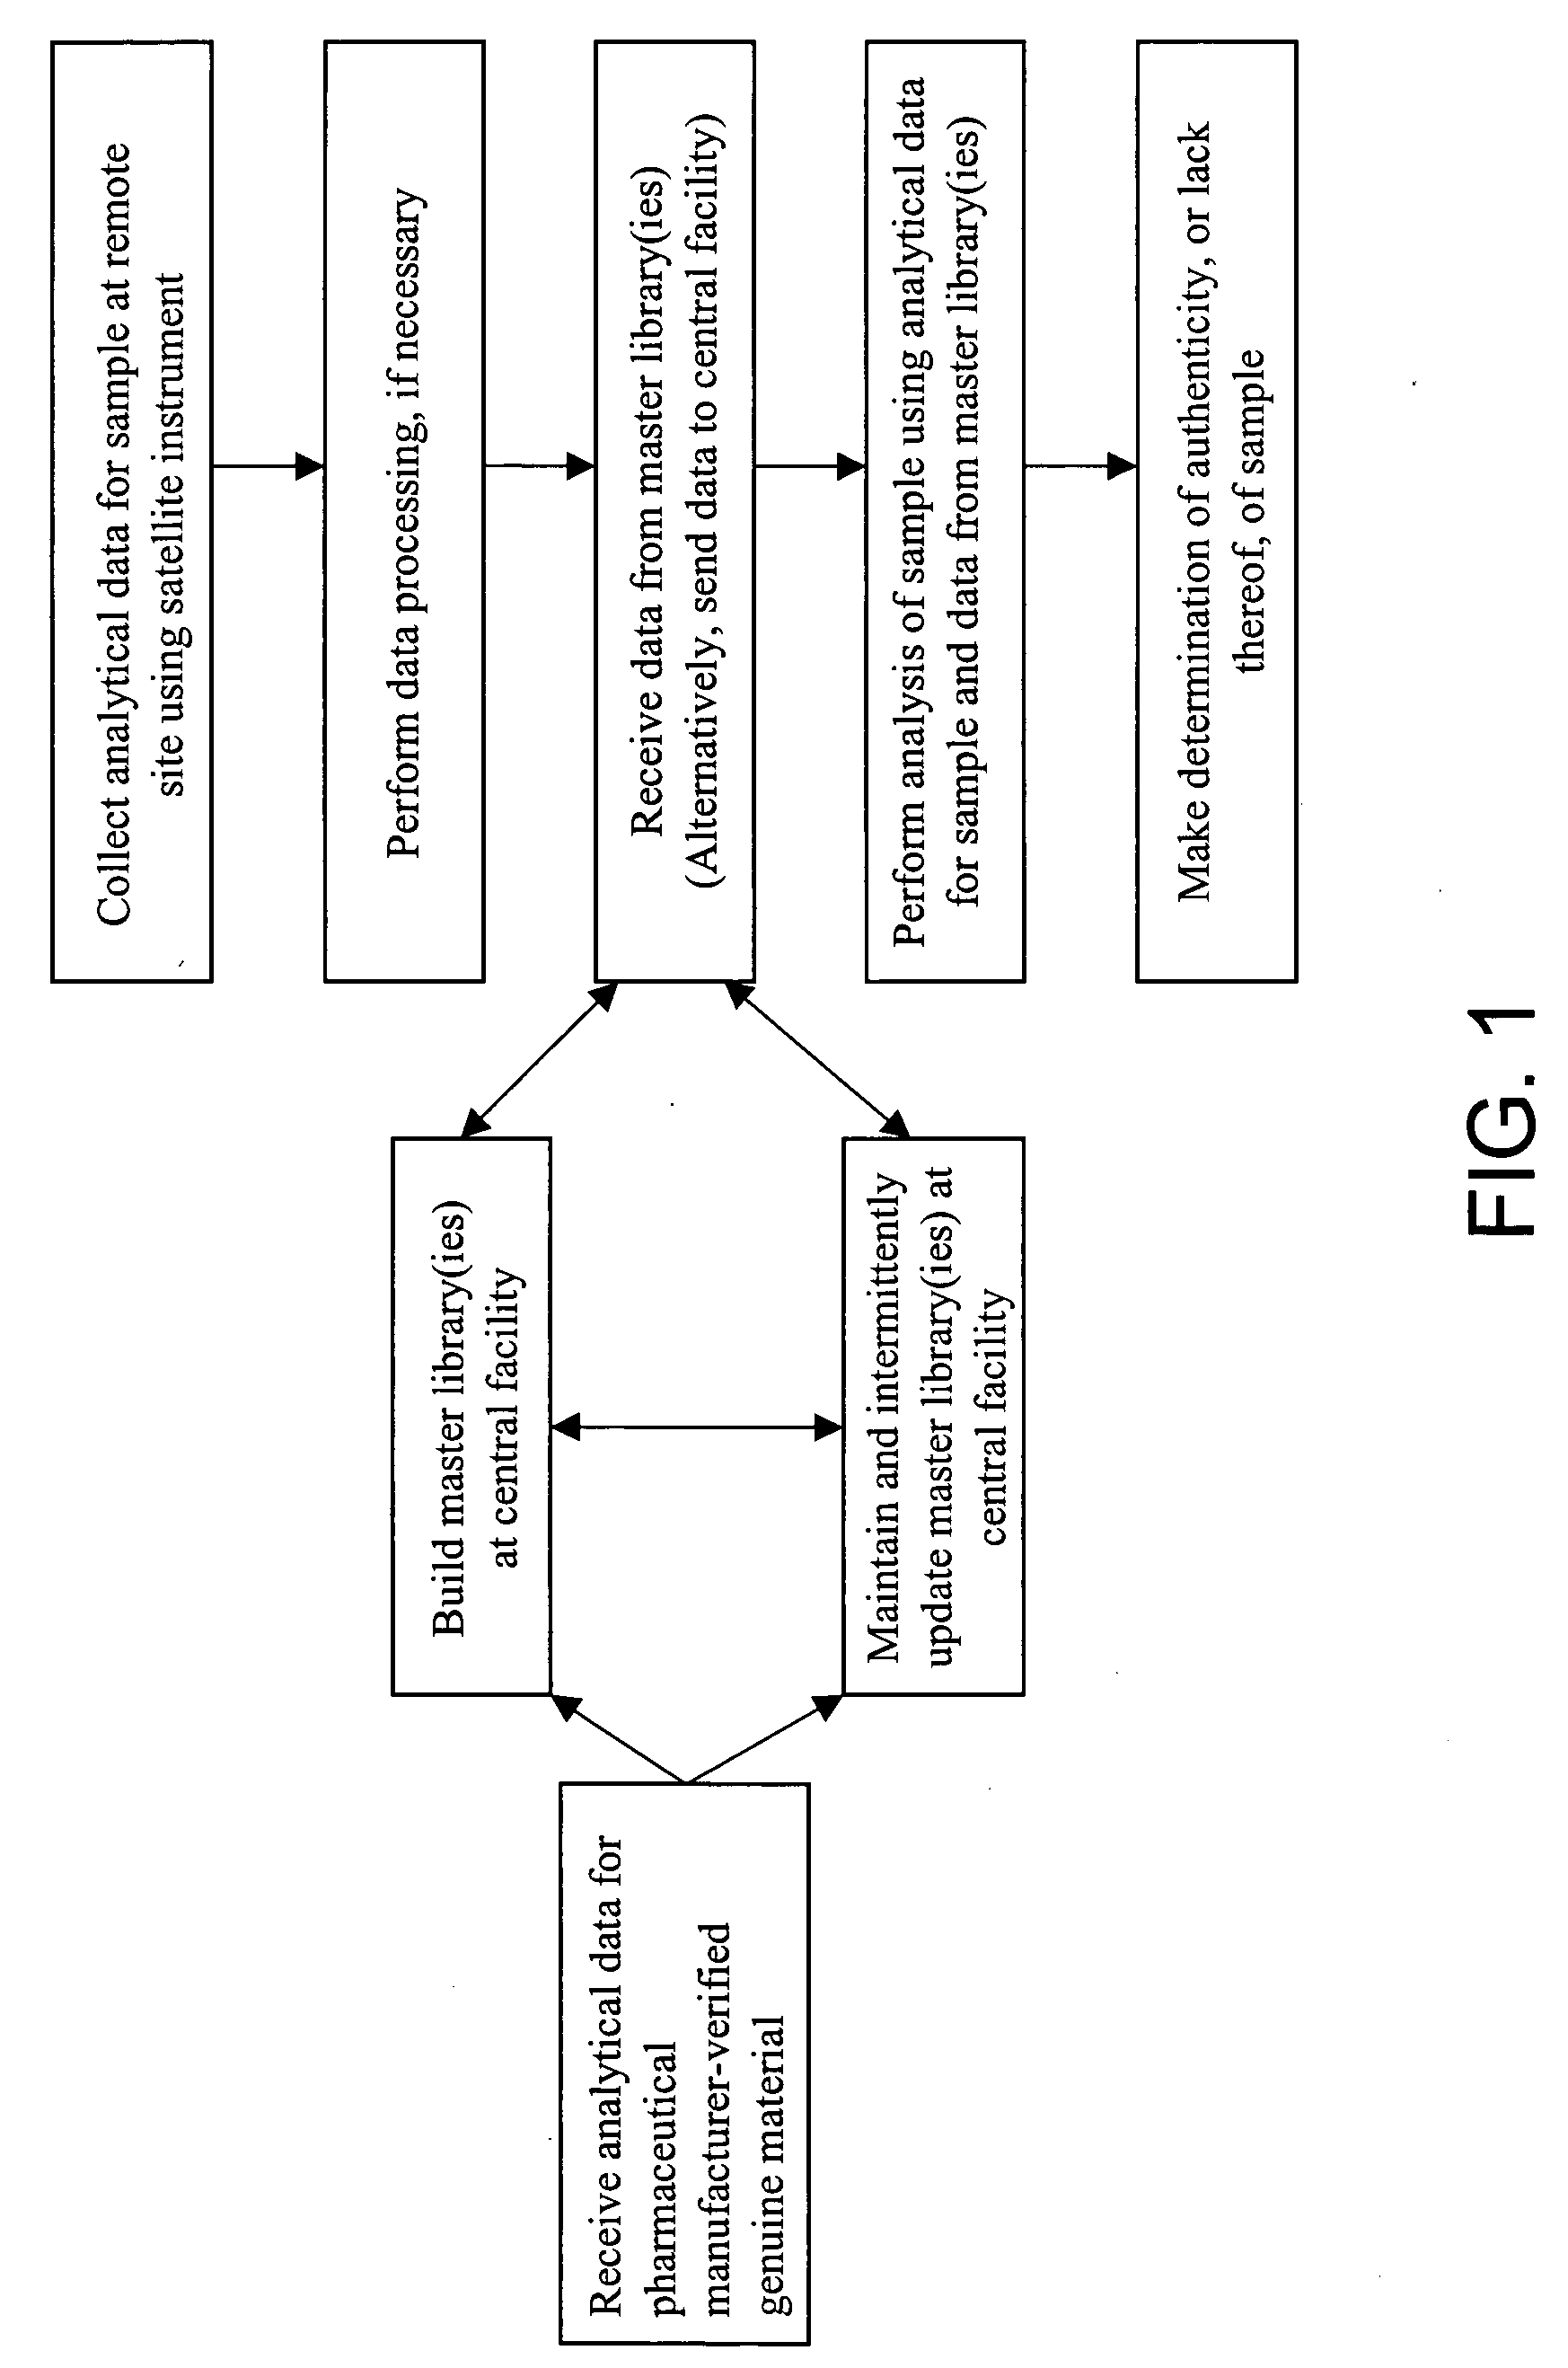 Database and method of use for authenticity verification of pharmaceuticals